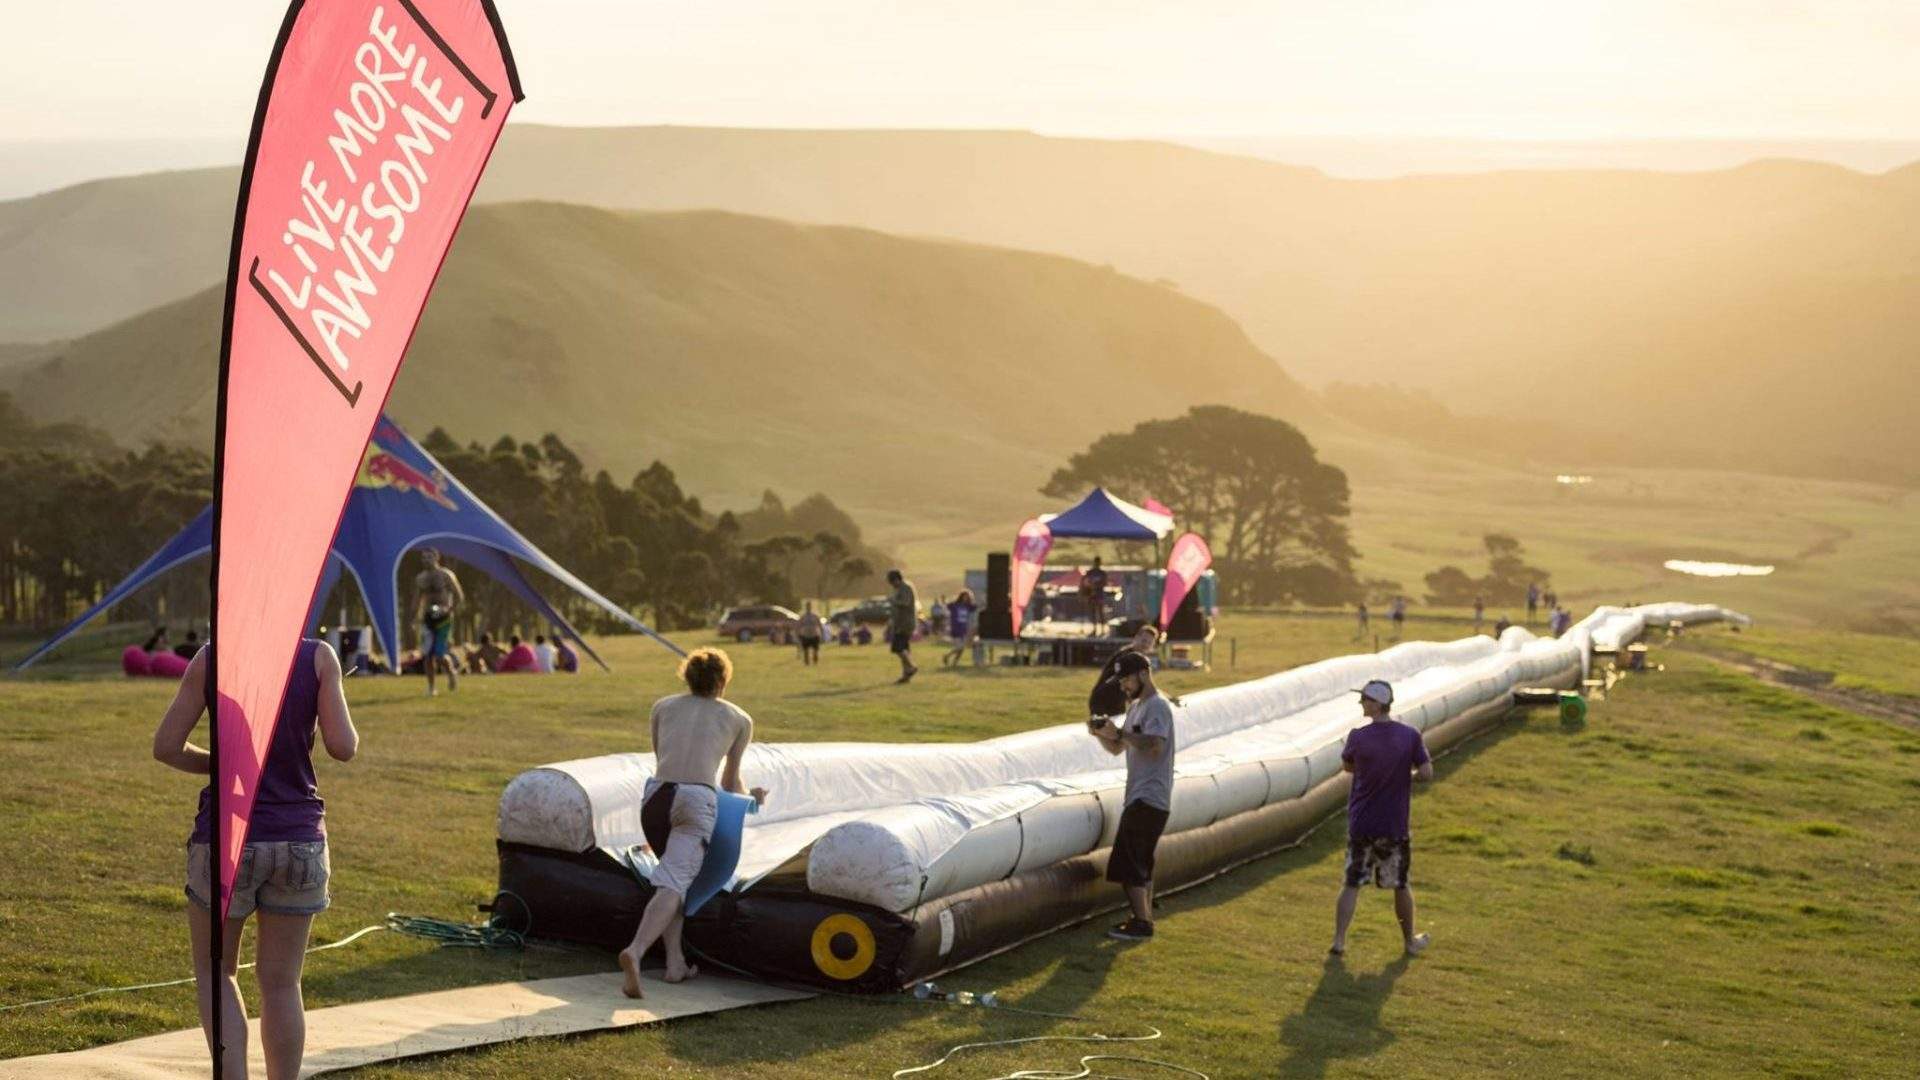 The World's Biggest Waterslide Is Coming Back for One Last Slippery Ride